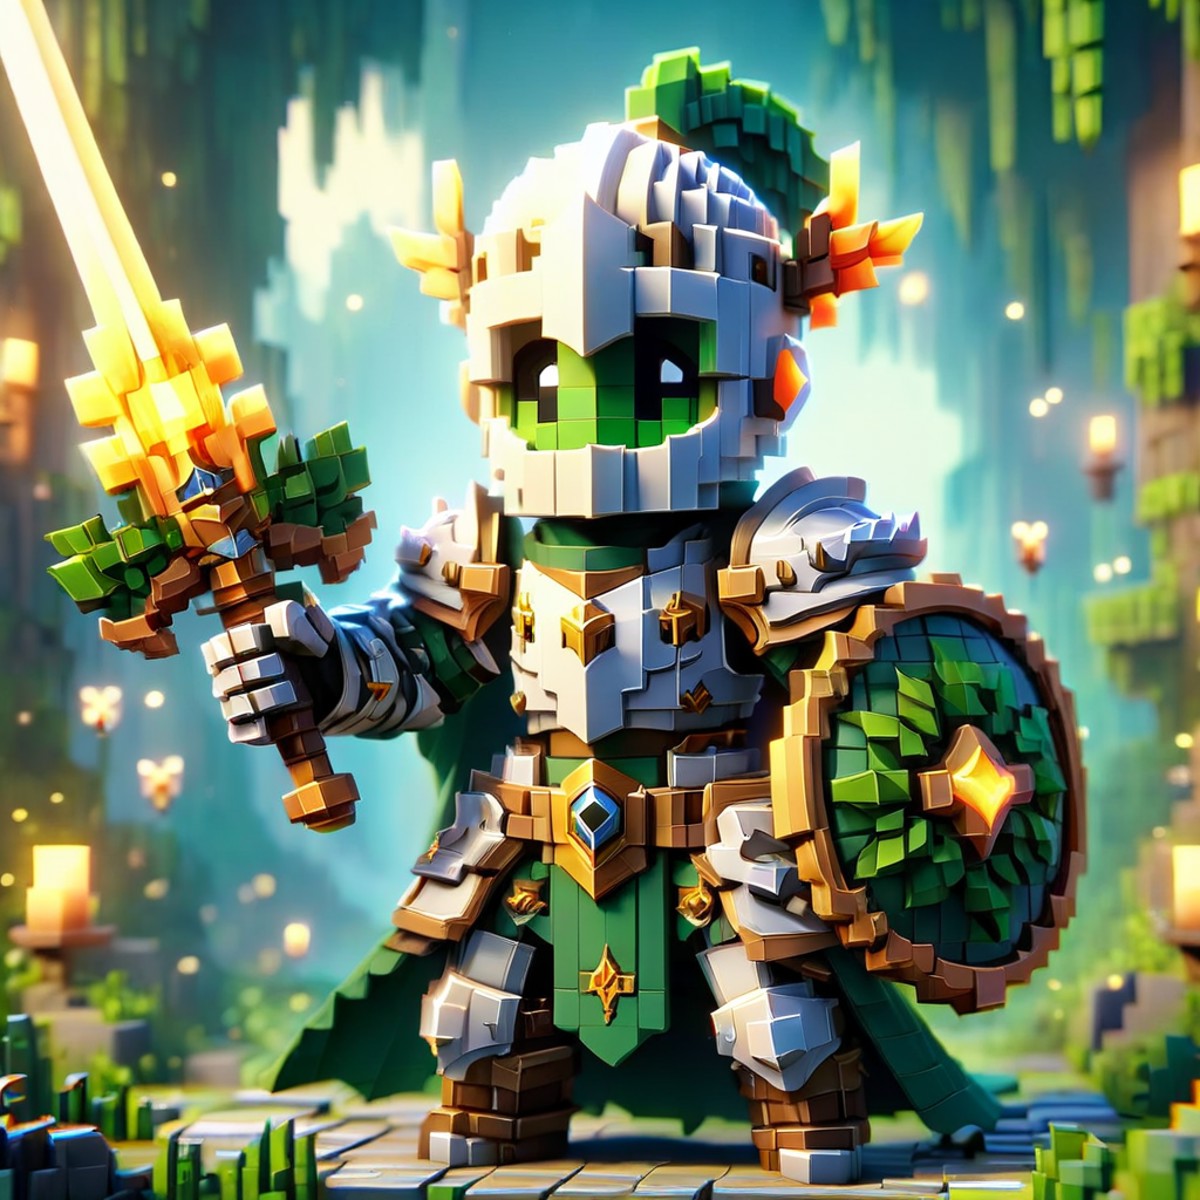 a cinematic shot of a fantasy pixel ral-vxl knight, holding a sword and shield, wearing armor, forest in background, Amazi...